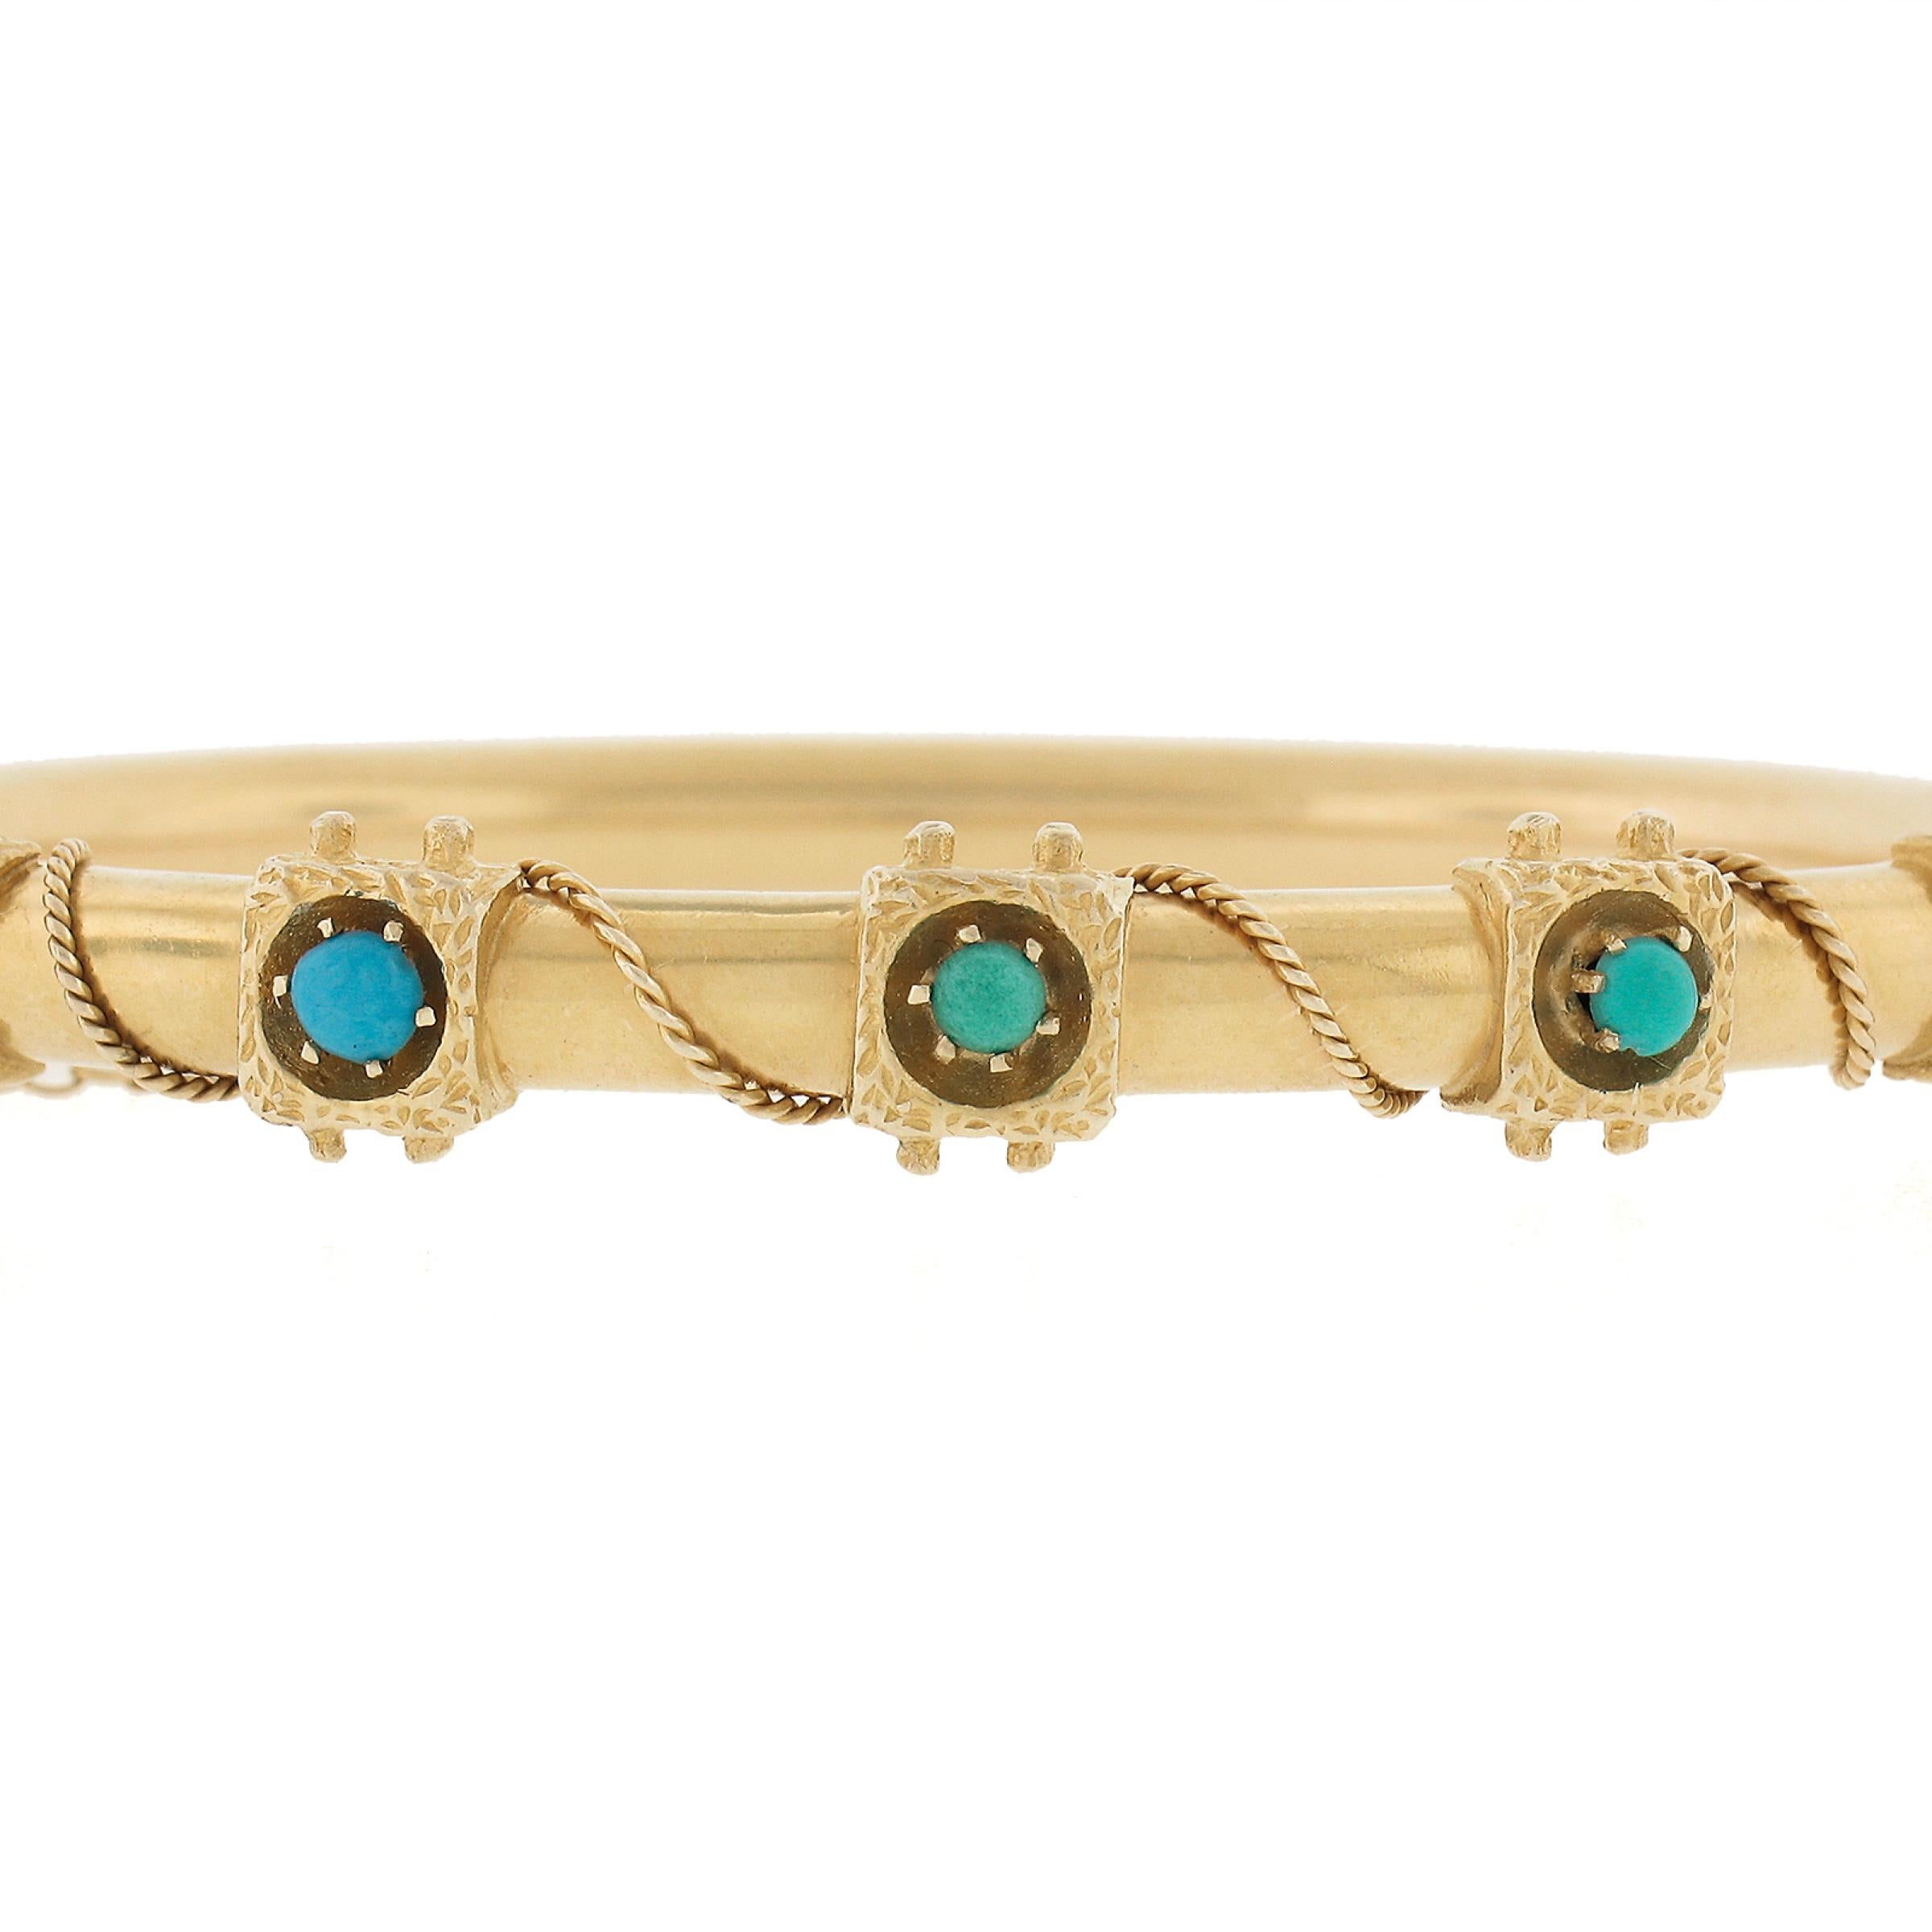 Cabochon Vintage Victorian Revival 14k Gold Turquoise Twisted Wire Hinged Bangle Bracelet